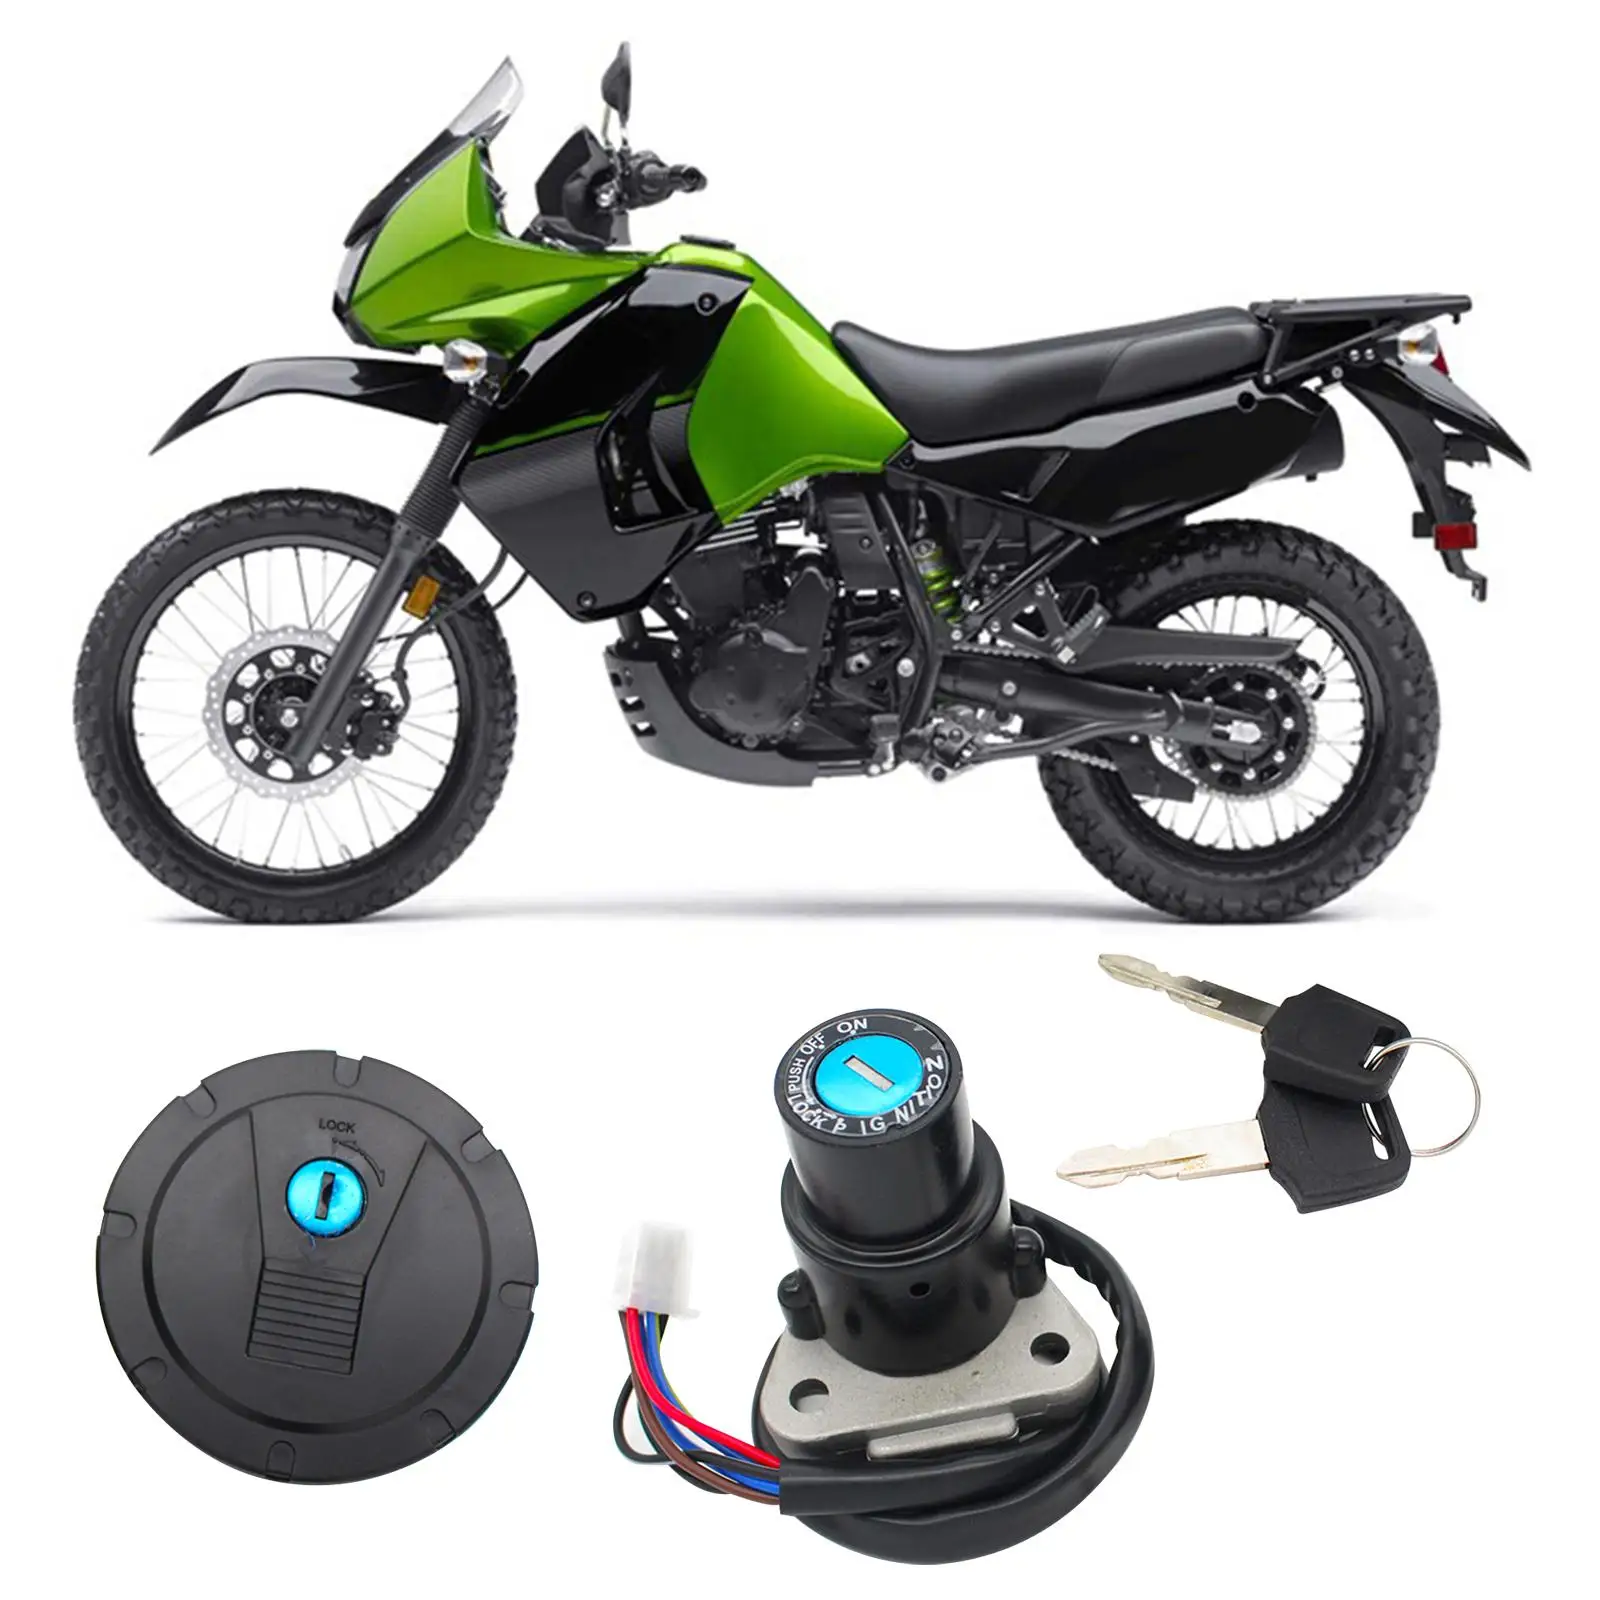 Ignition Key Switch High Performance Premium Accessories Durable Replaces with Key for Kawasaki Klr650 Klr 650 1987-2007